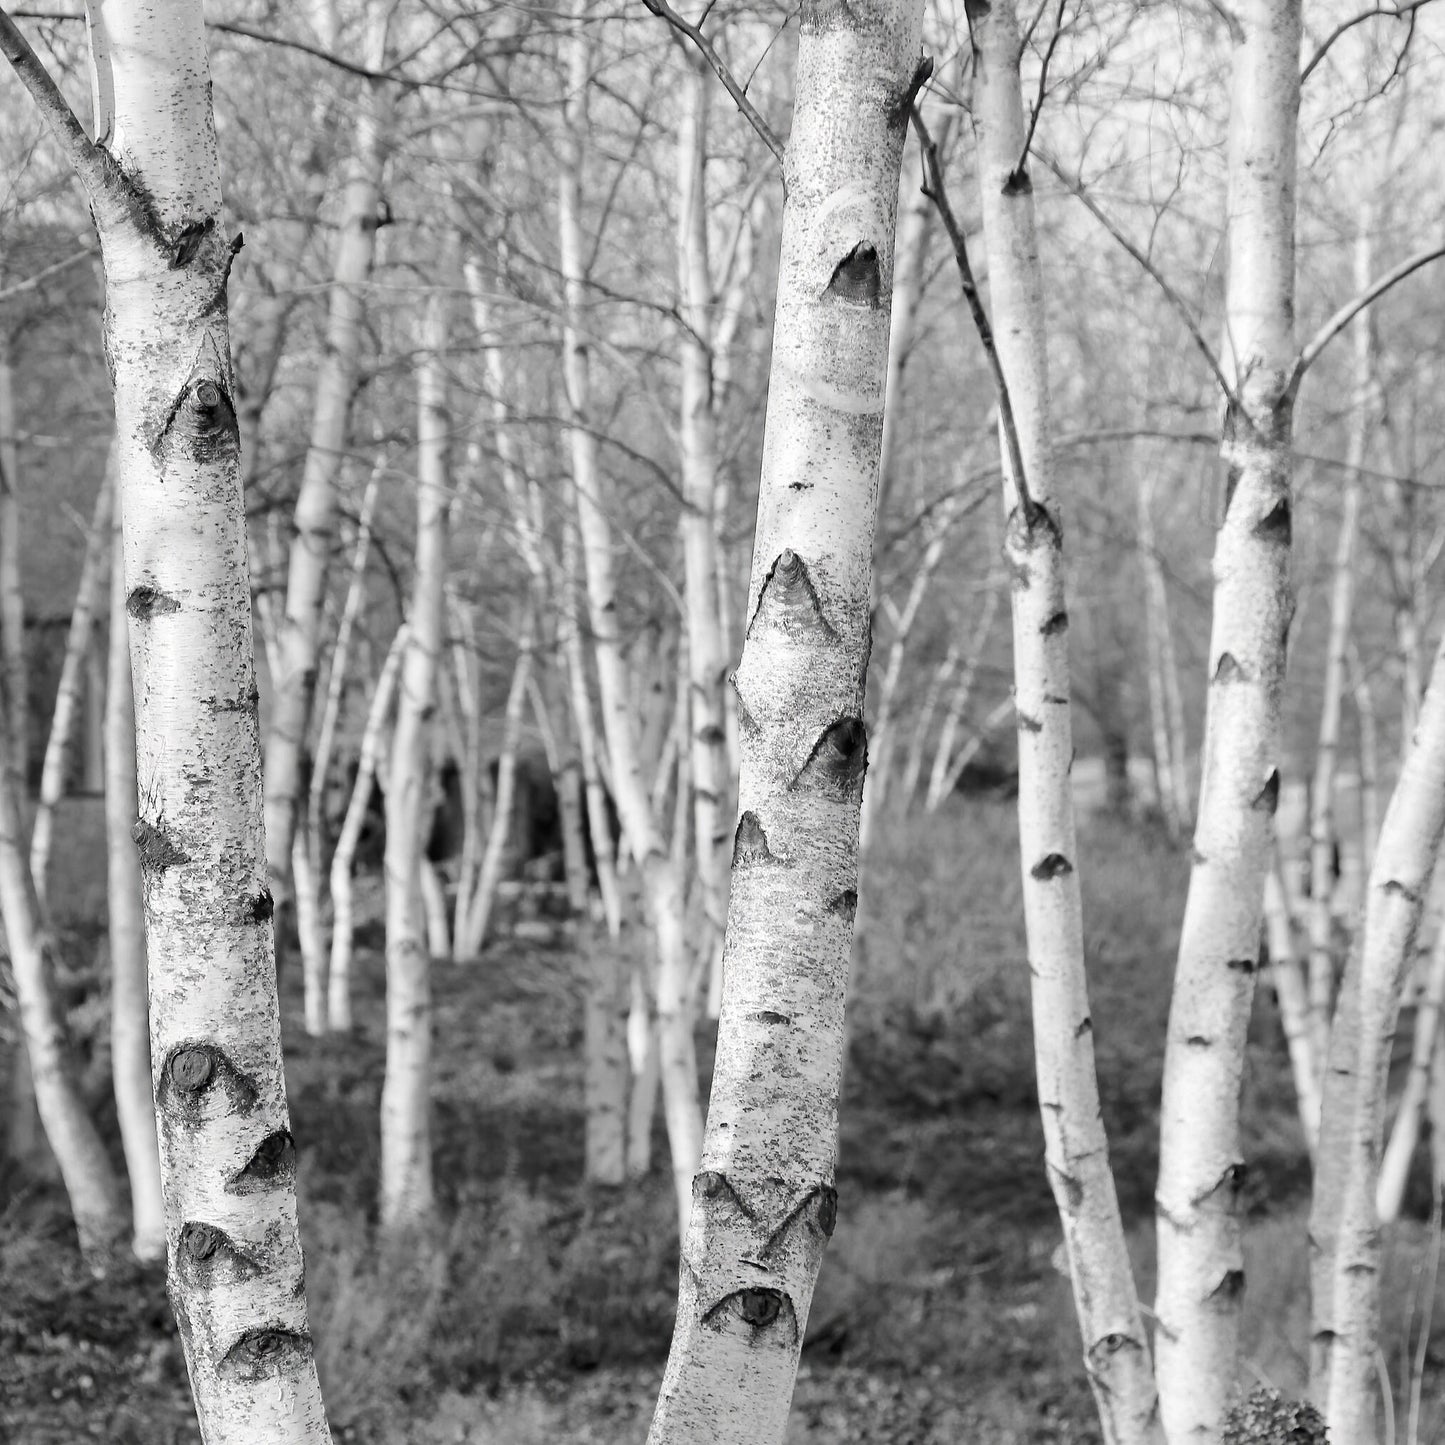 Birch Trees art, VERTICAL photo print, black and white picture, photography wall decor, large paper or canvas, 5x7 8x10 11x14 to 30x45"